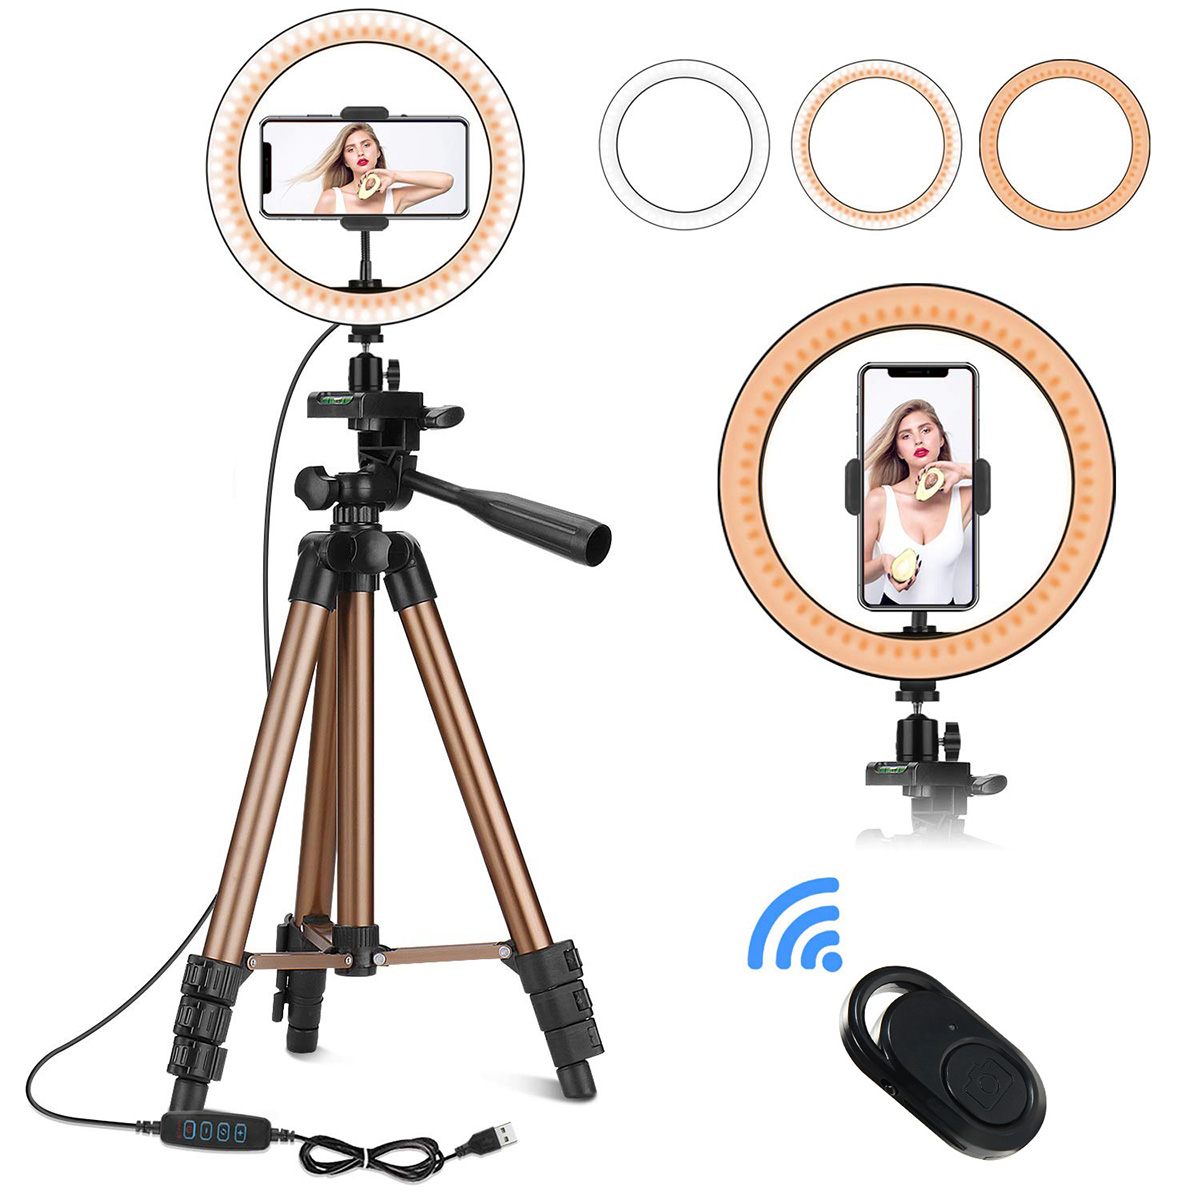 Controllable-6-inch-10-inch-LED-Selfie-Ring-Light--Tripod-Stand--Phone-Holder-Photography-YouTube-Vi-1646618-5